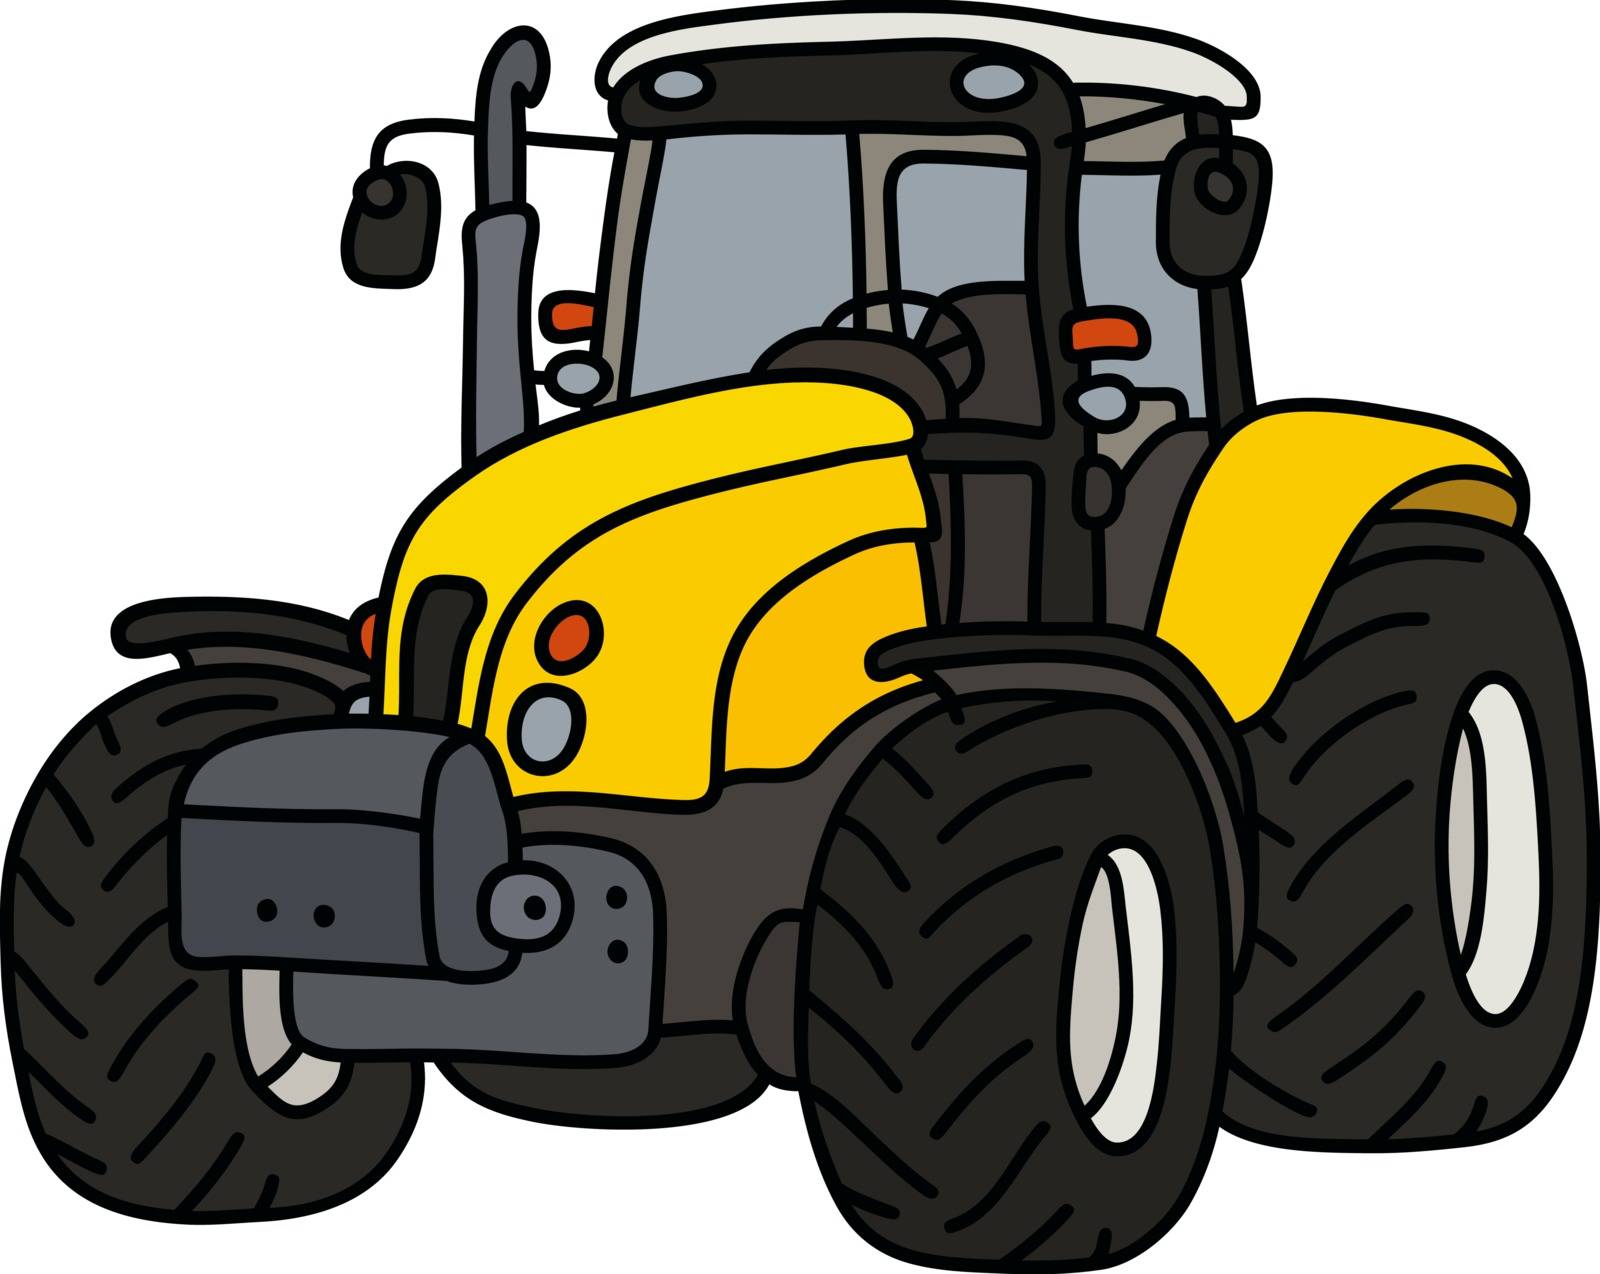 The hand drawing of a yellow heavy tractor